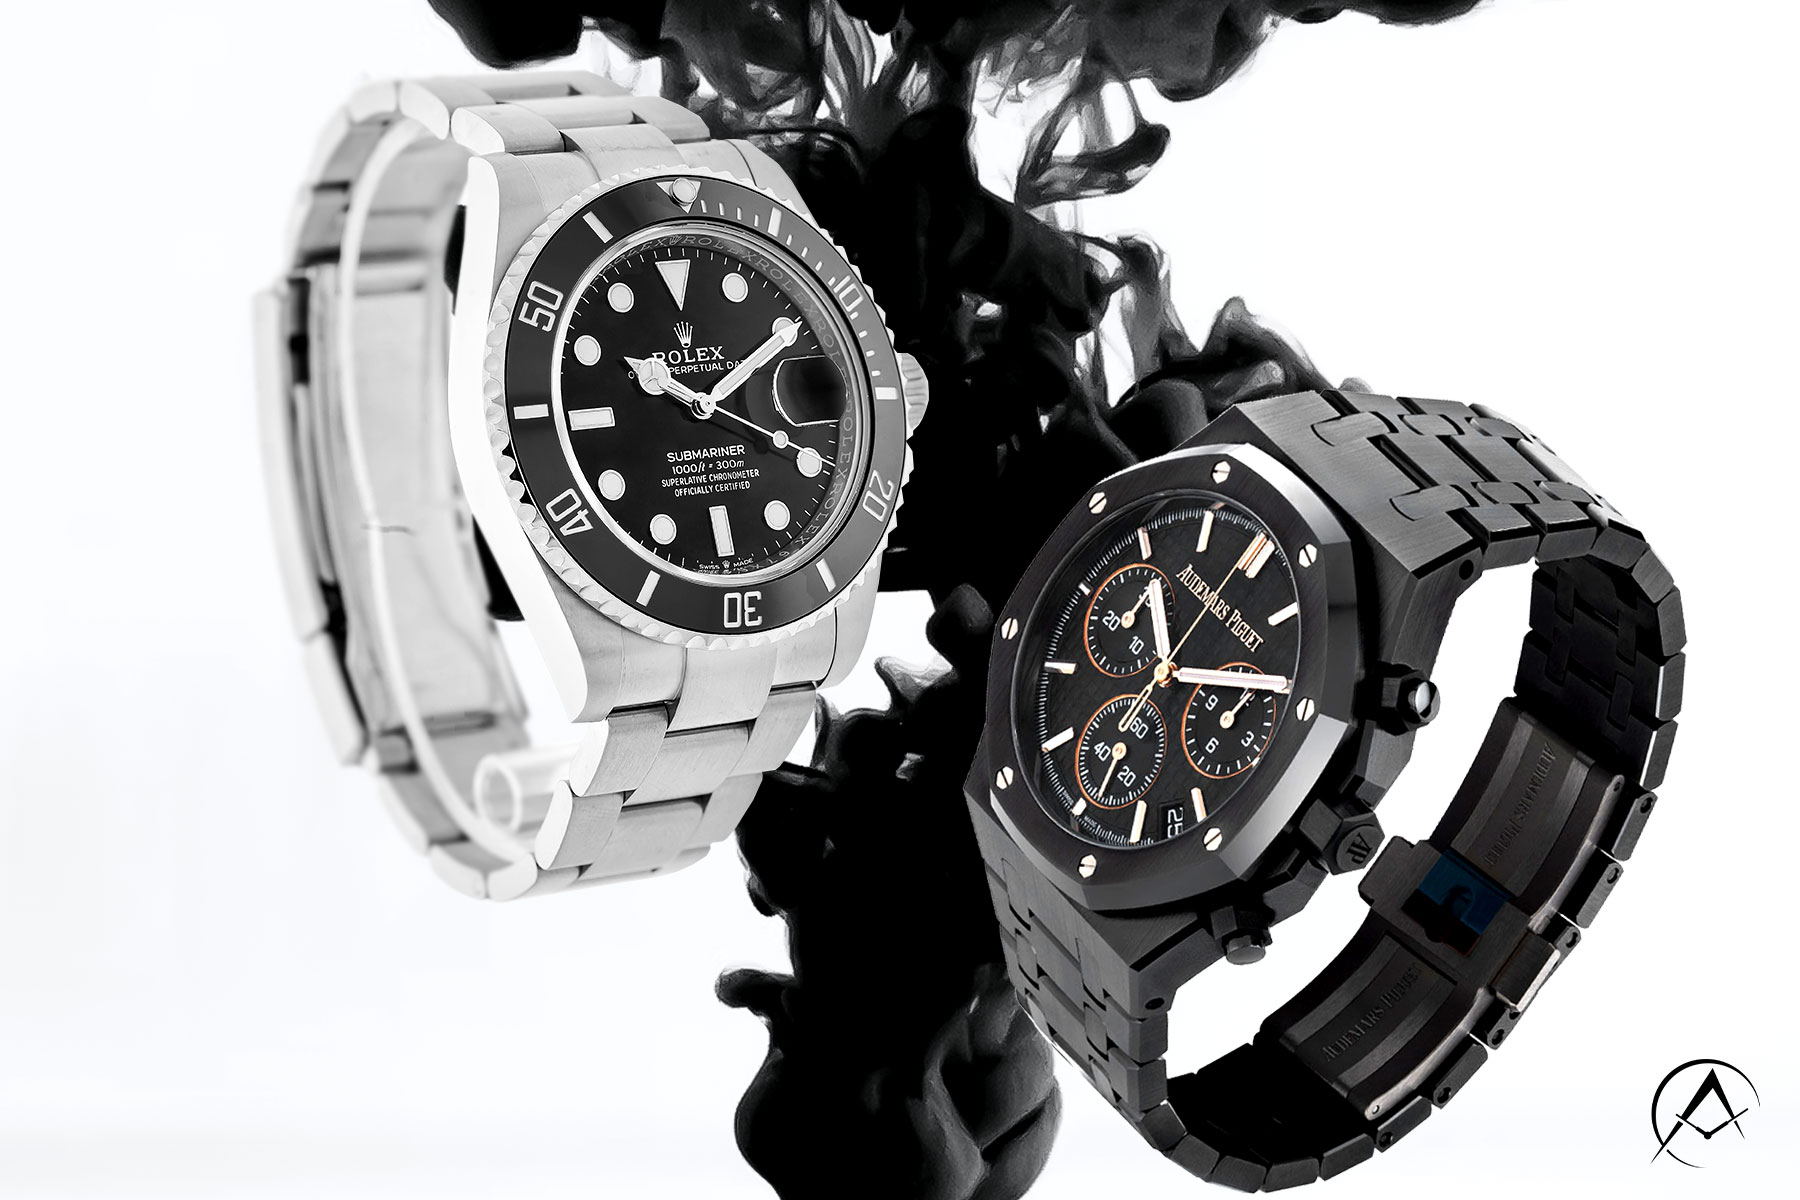 Black Ceramic Audemars Piguet Royal Oak Timepiece and Stainless Steel Rolex Submariner Timepiece both on clear C-Rings on a White Background with Black Smoke.